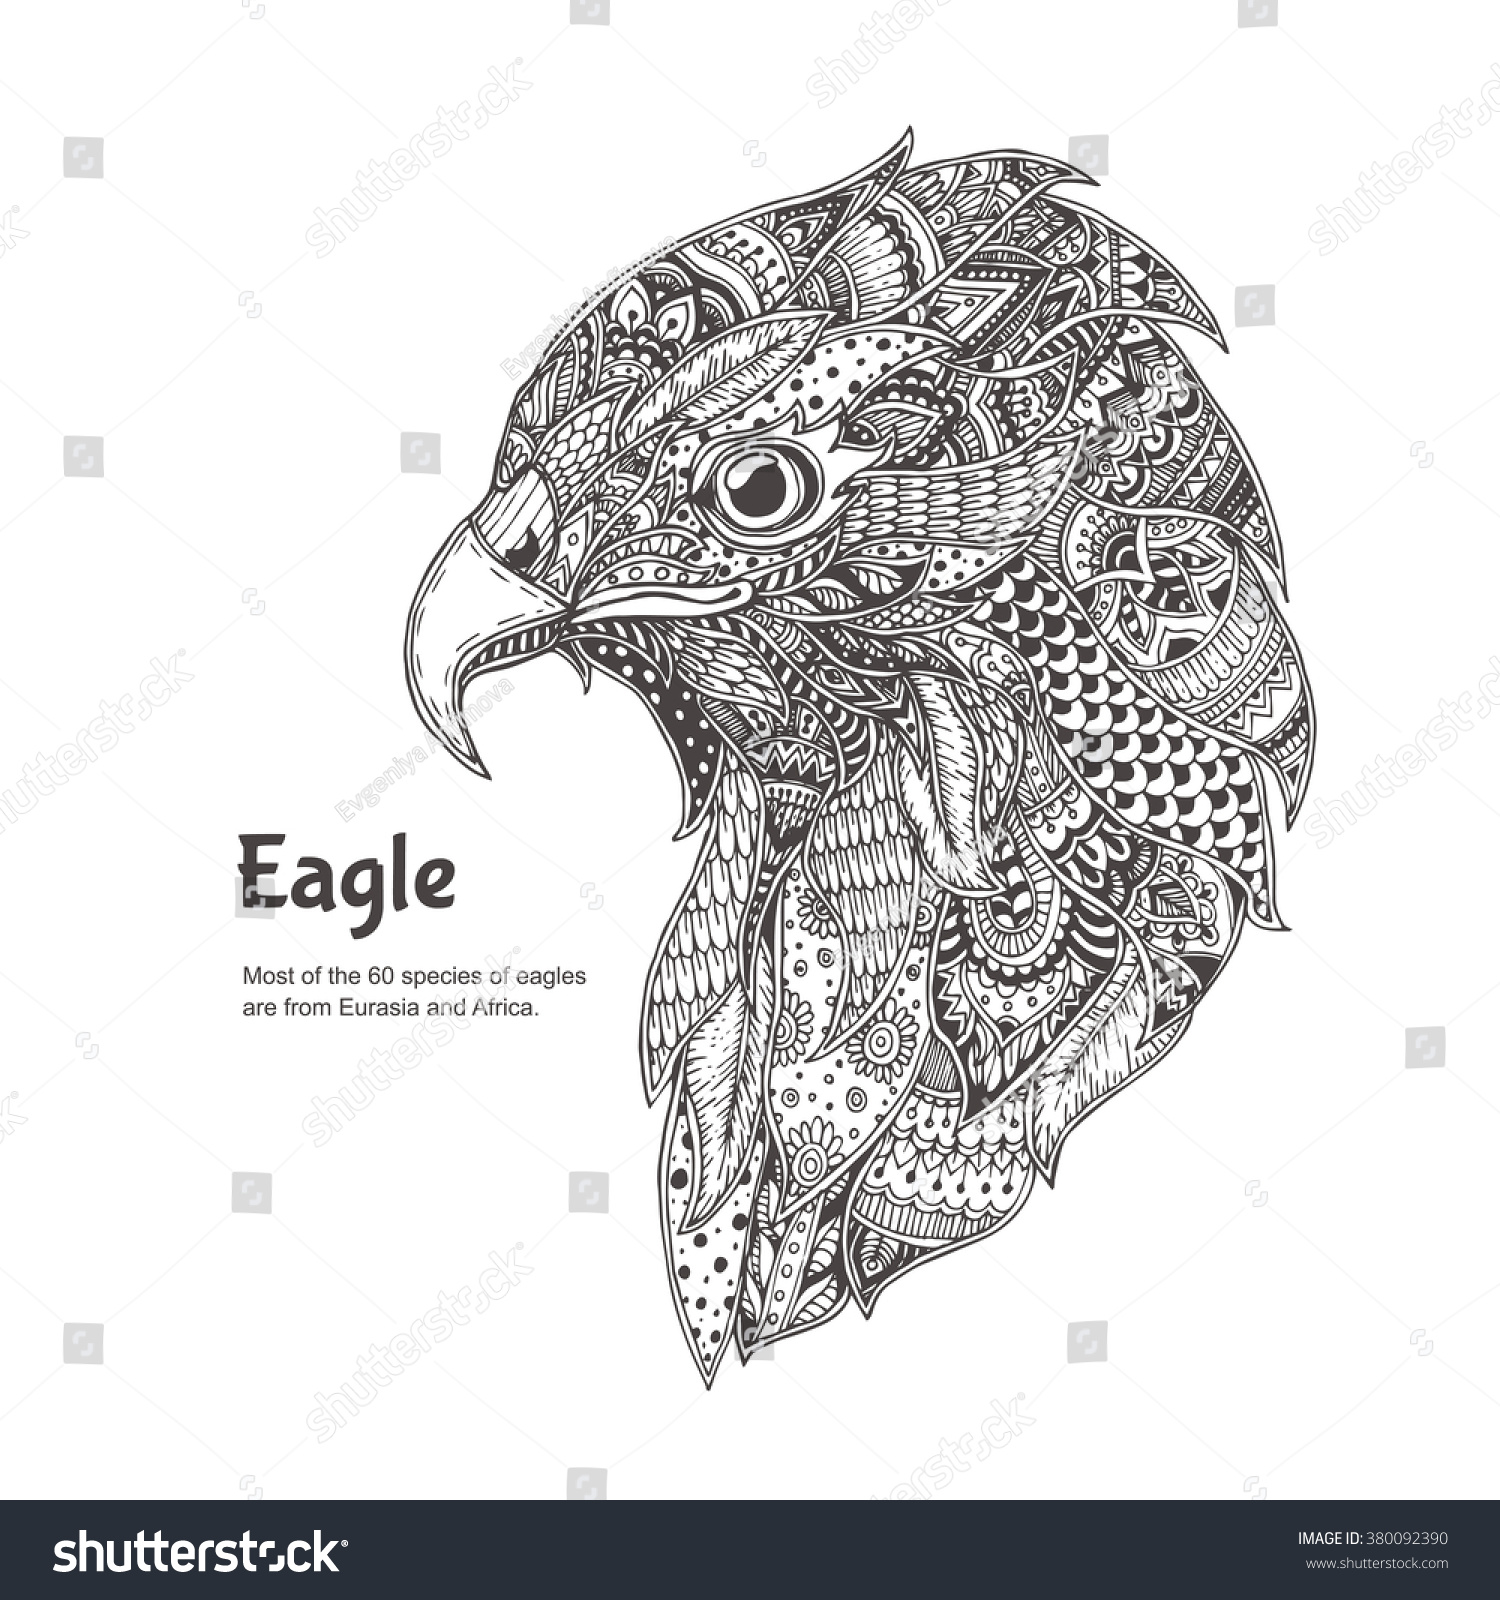 eagle coloring pages for adults - photo #34